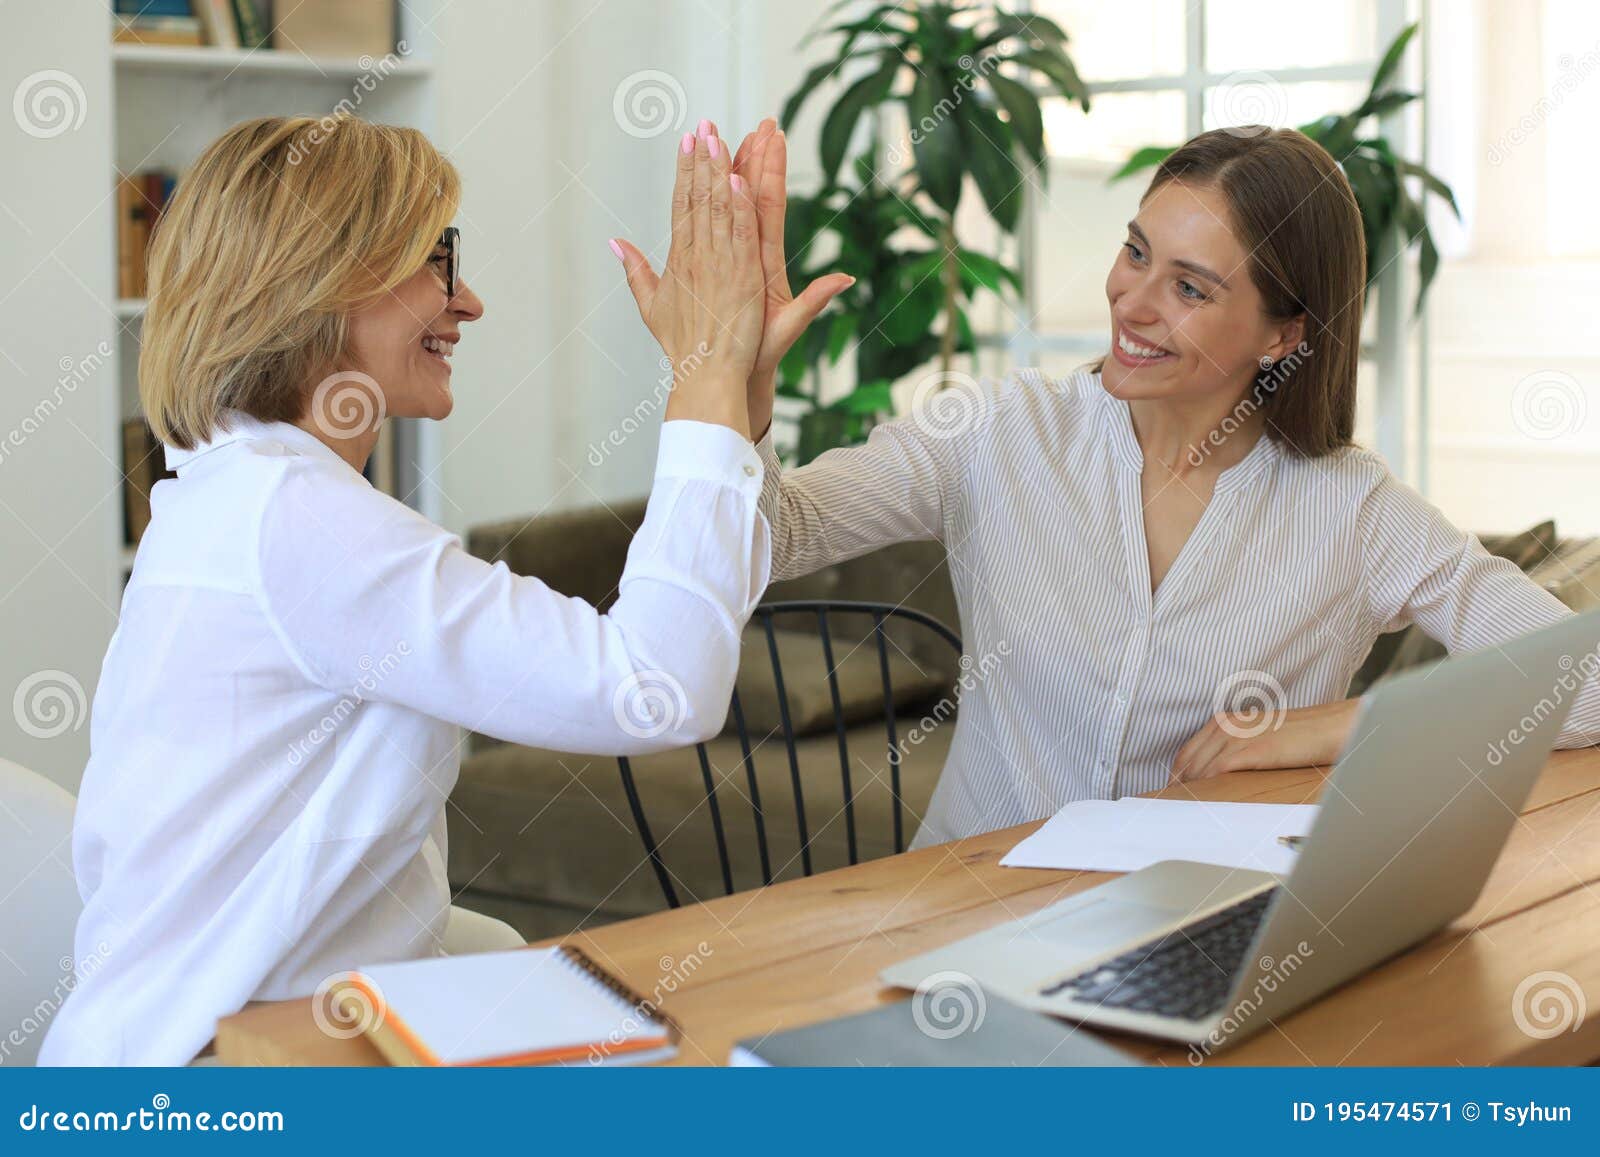 middle aged businesswoman giving high five to her young female collegue